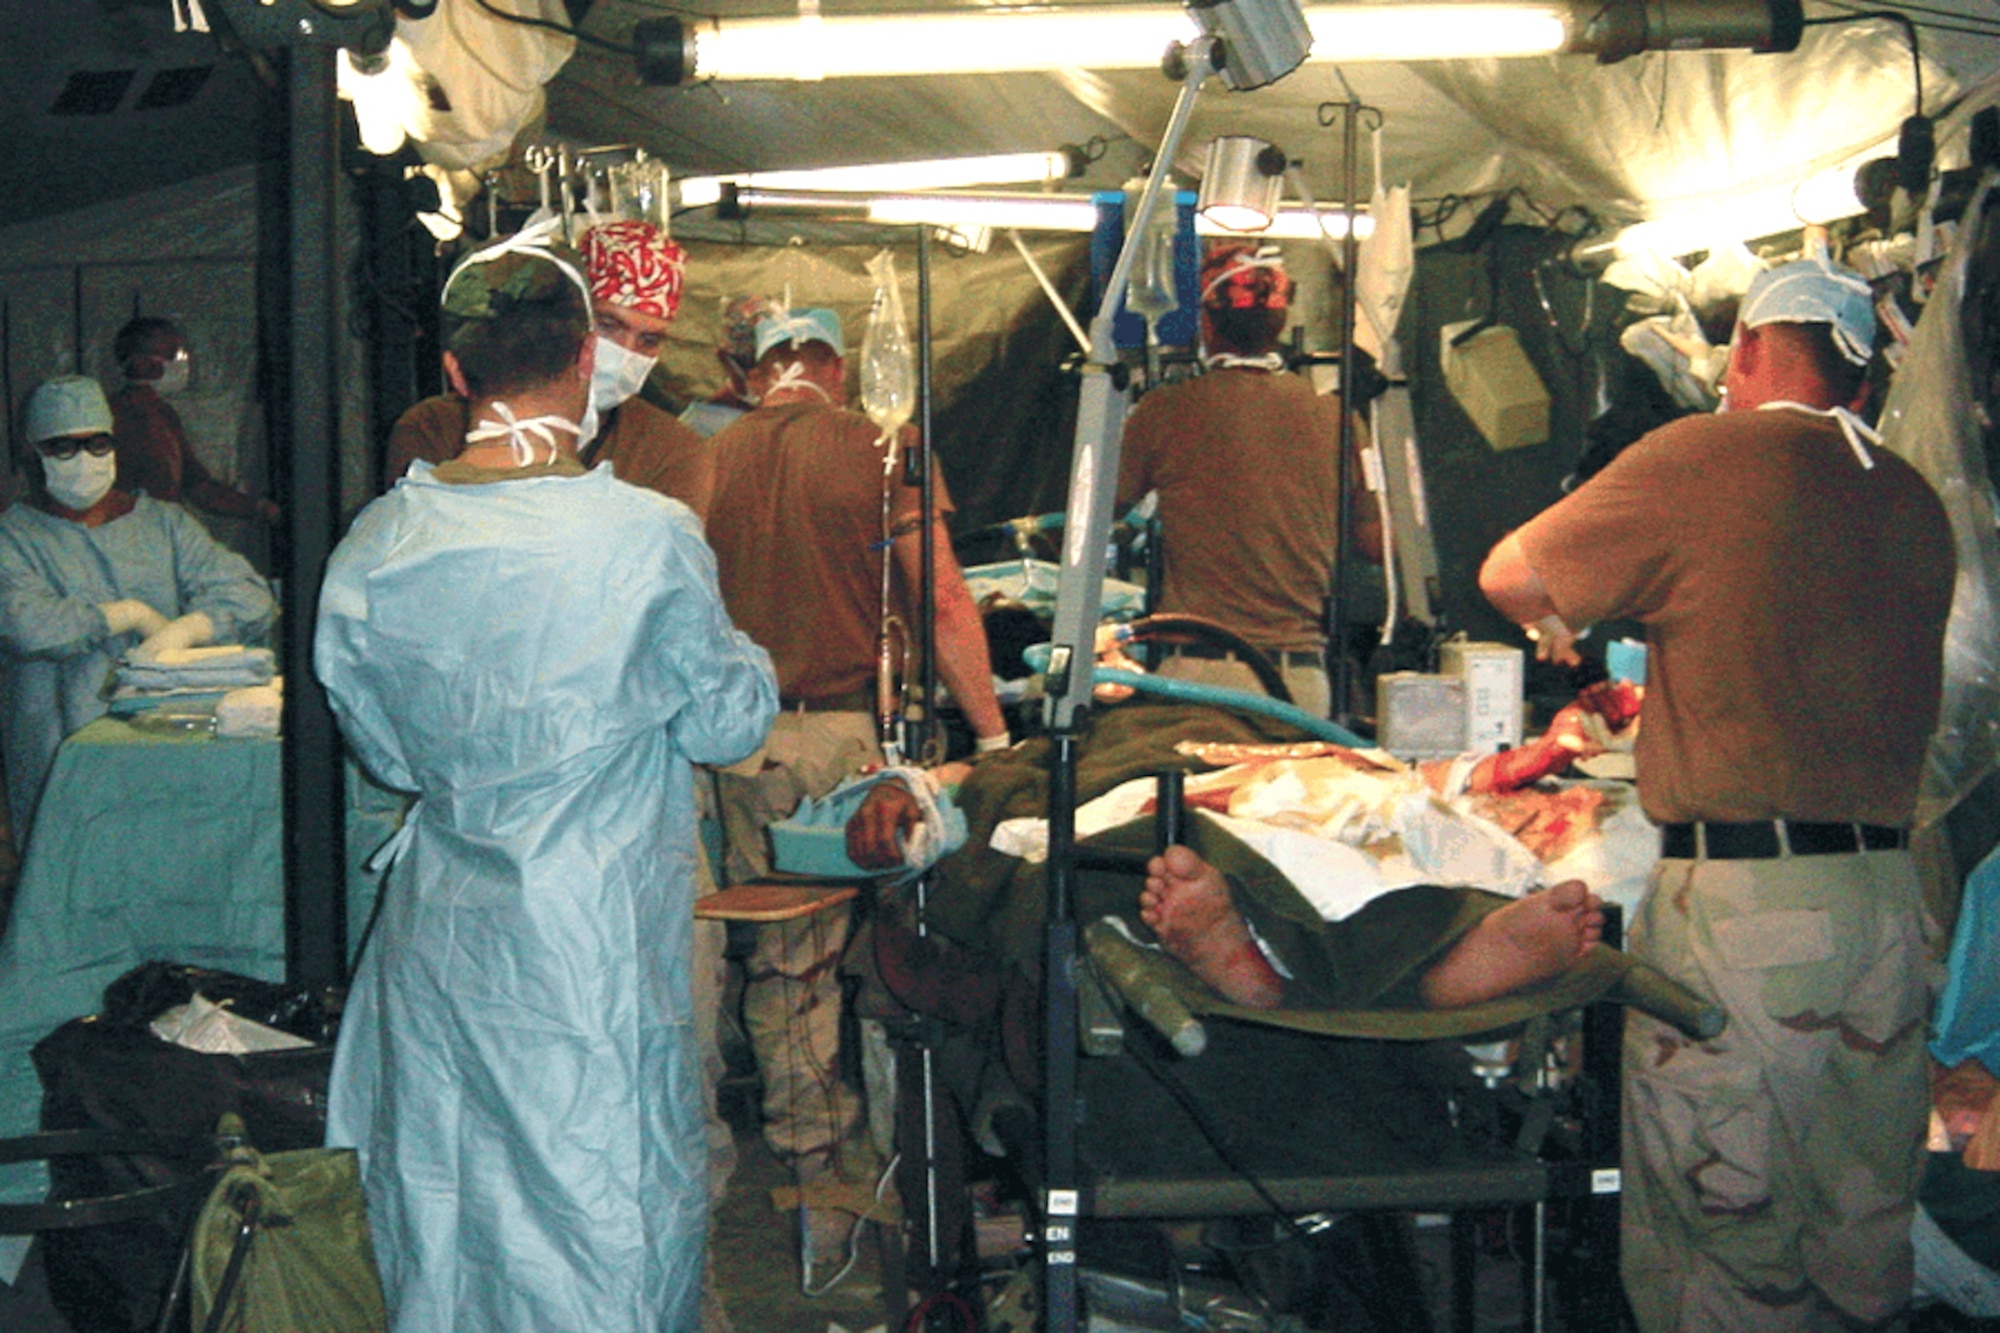 Medical personnel respond to a mass casualty event during Operation Desert Storm.